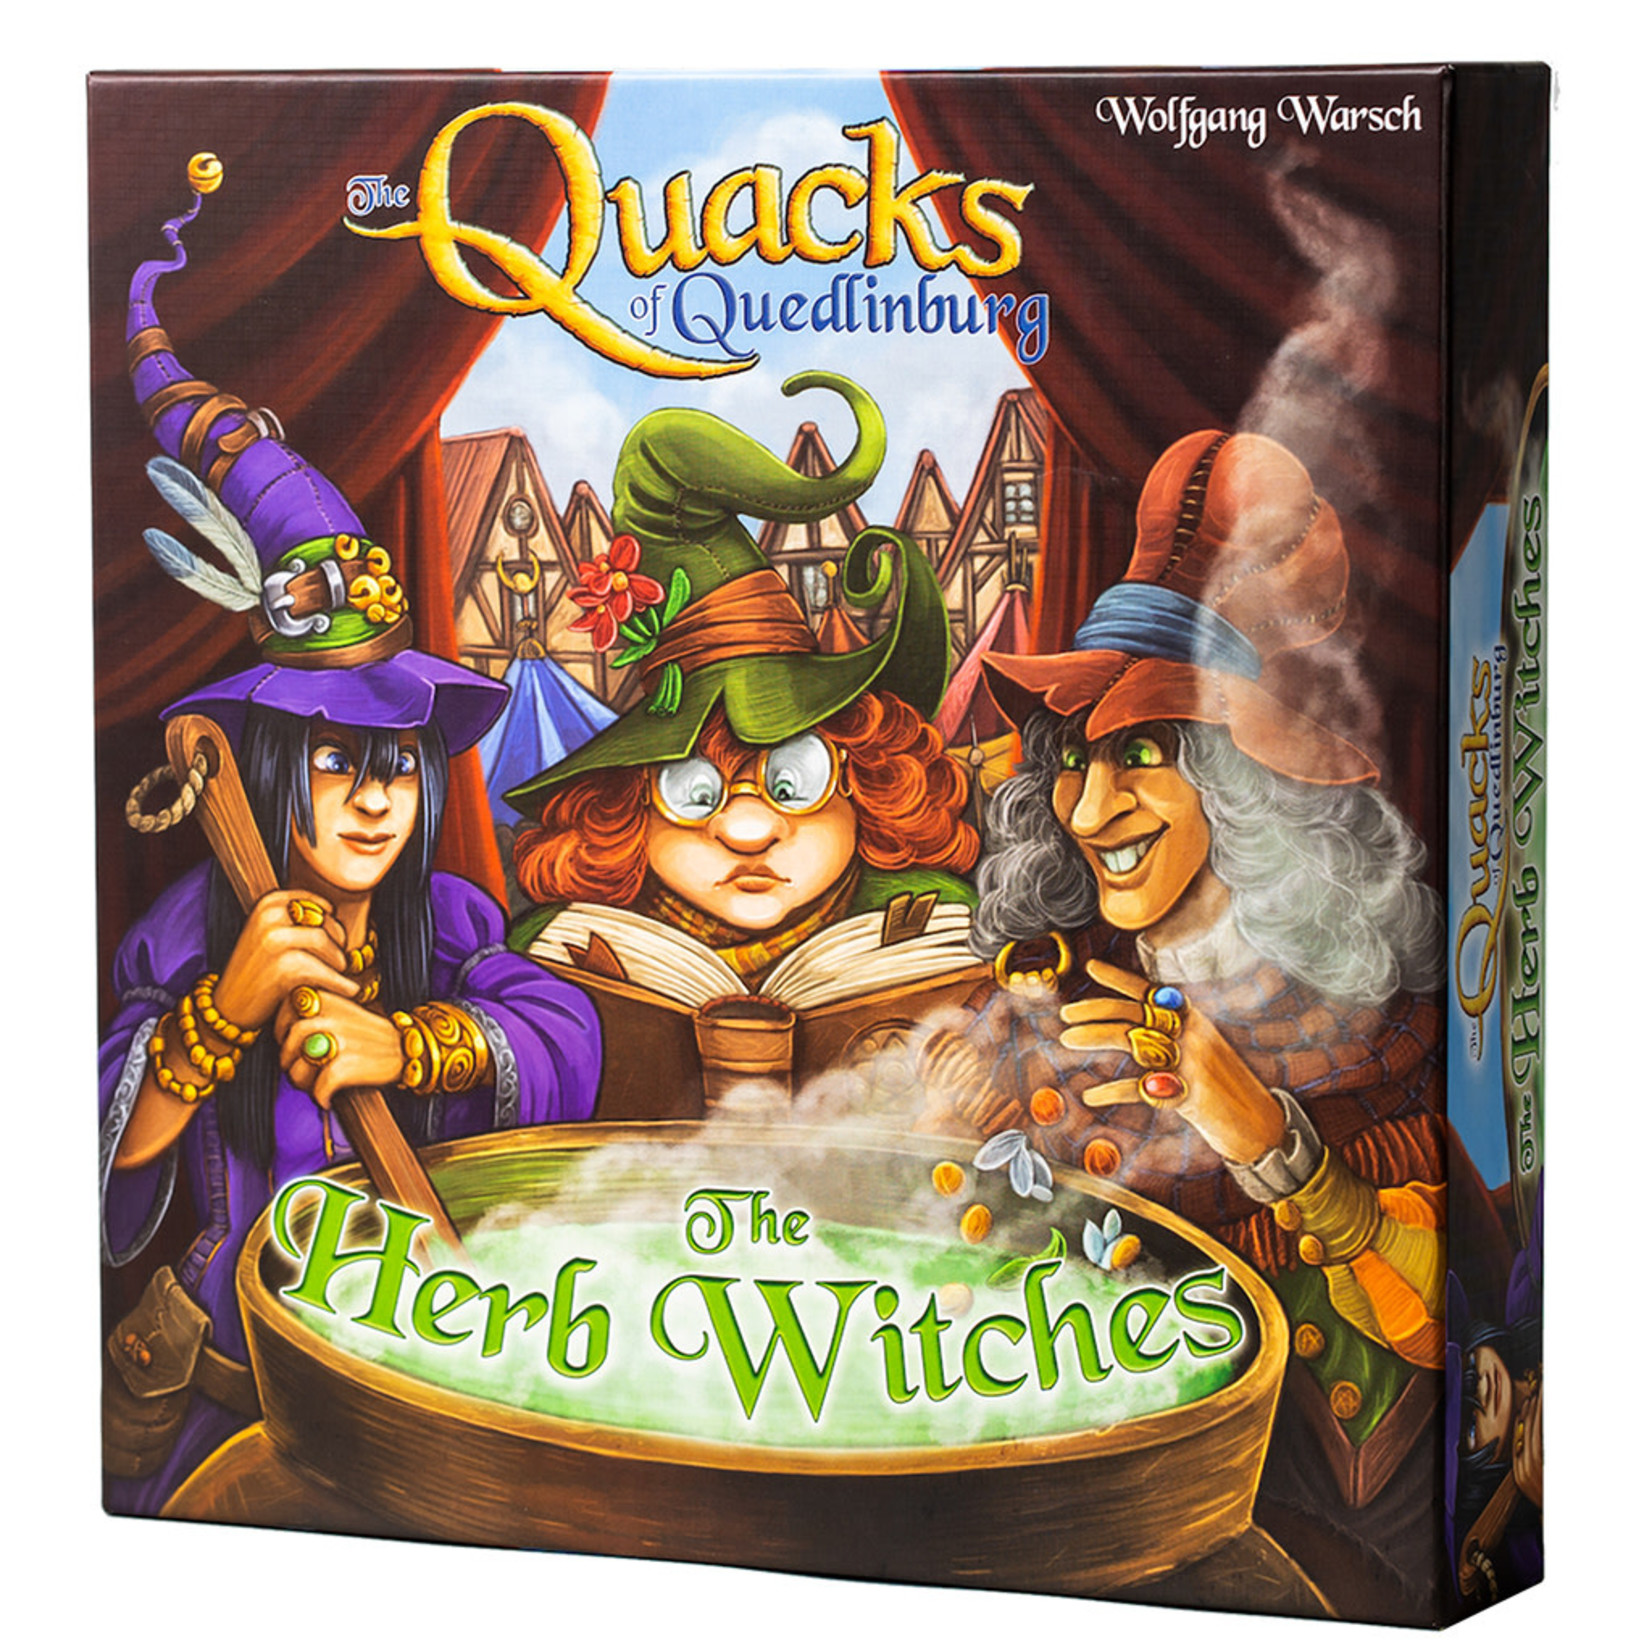 Palm Court Quacks of Quedlinburg: The Herb Witches Expansion